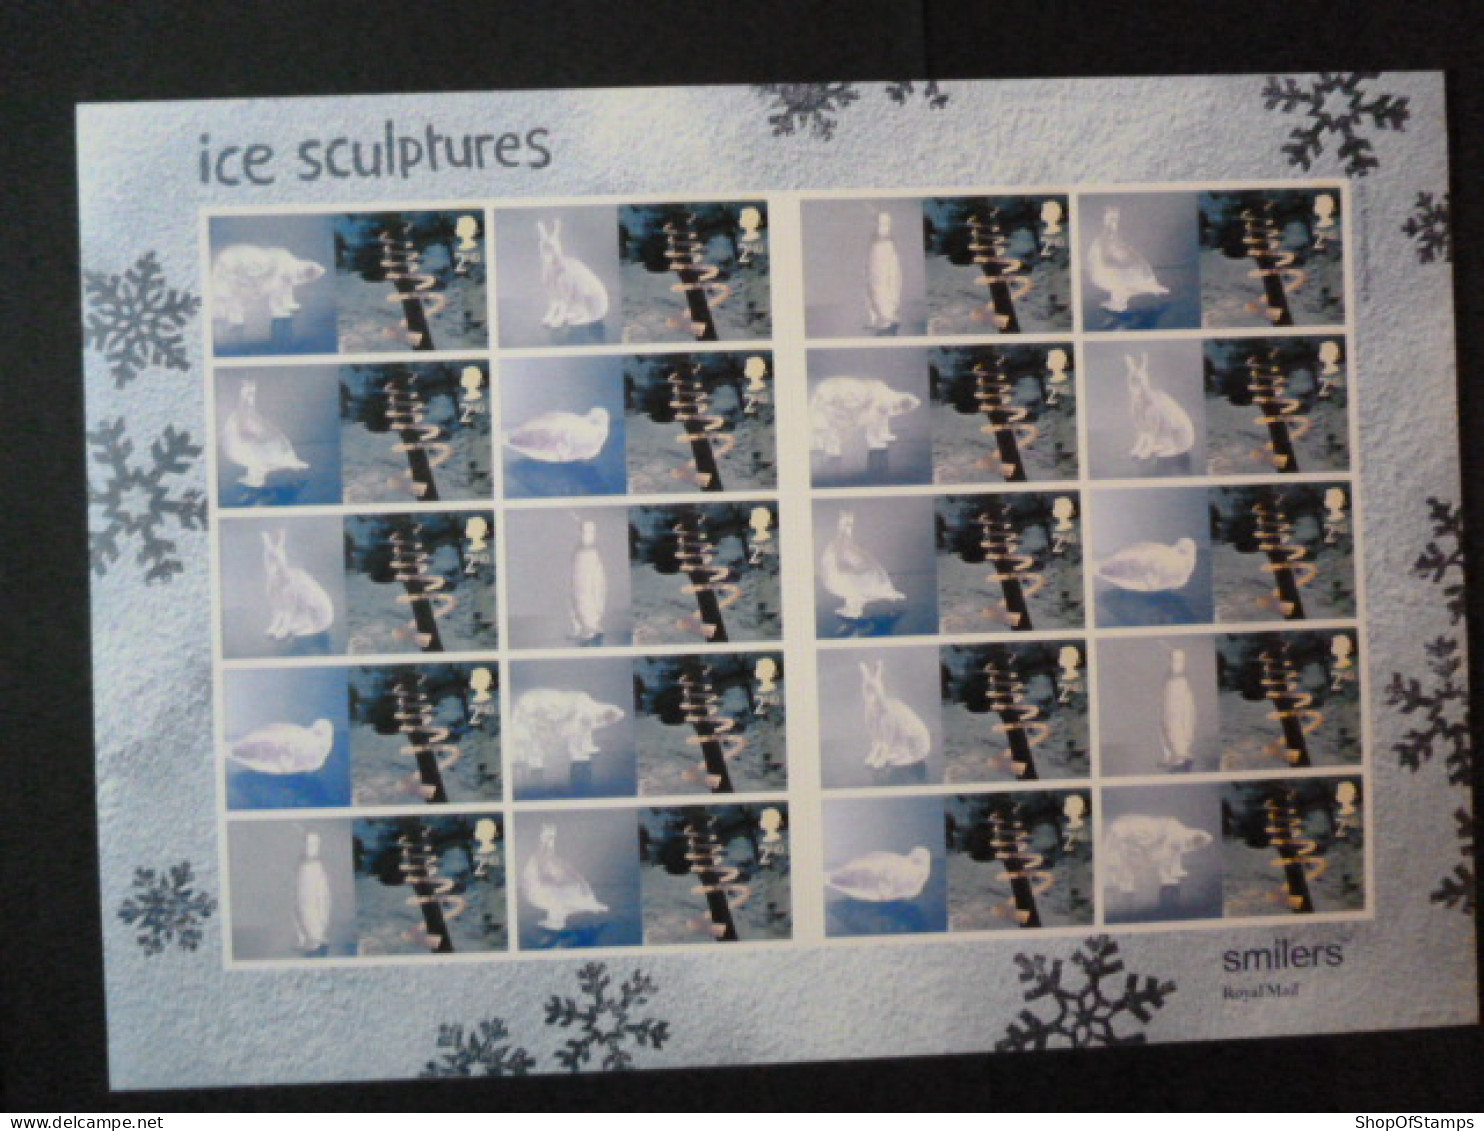 GREAT BRITAIN SG 2410 CHRISTMAS ICE SCULPTURES 20 STAMPS SMILER SHEET WITH GUTTERS & LABELS - Sheets, Plate Blocks & Multiples